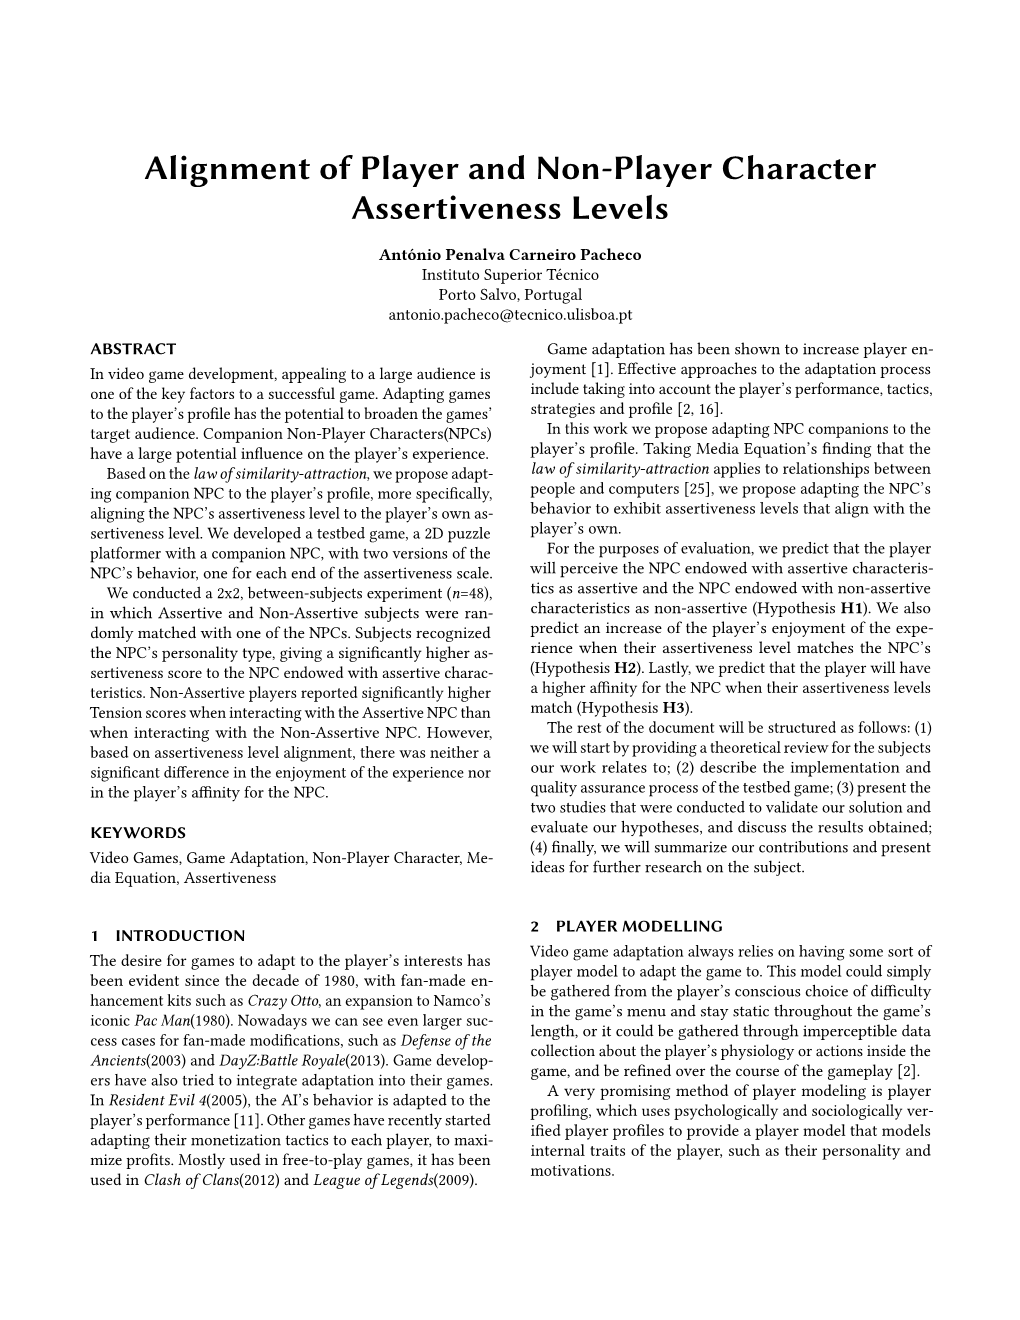 Alignment of Player and Non-Player Character Assertiveness Levels